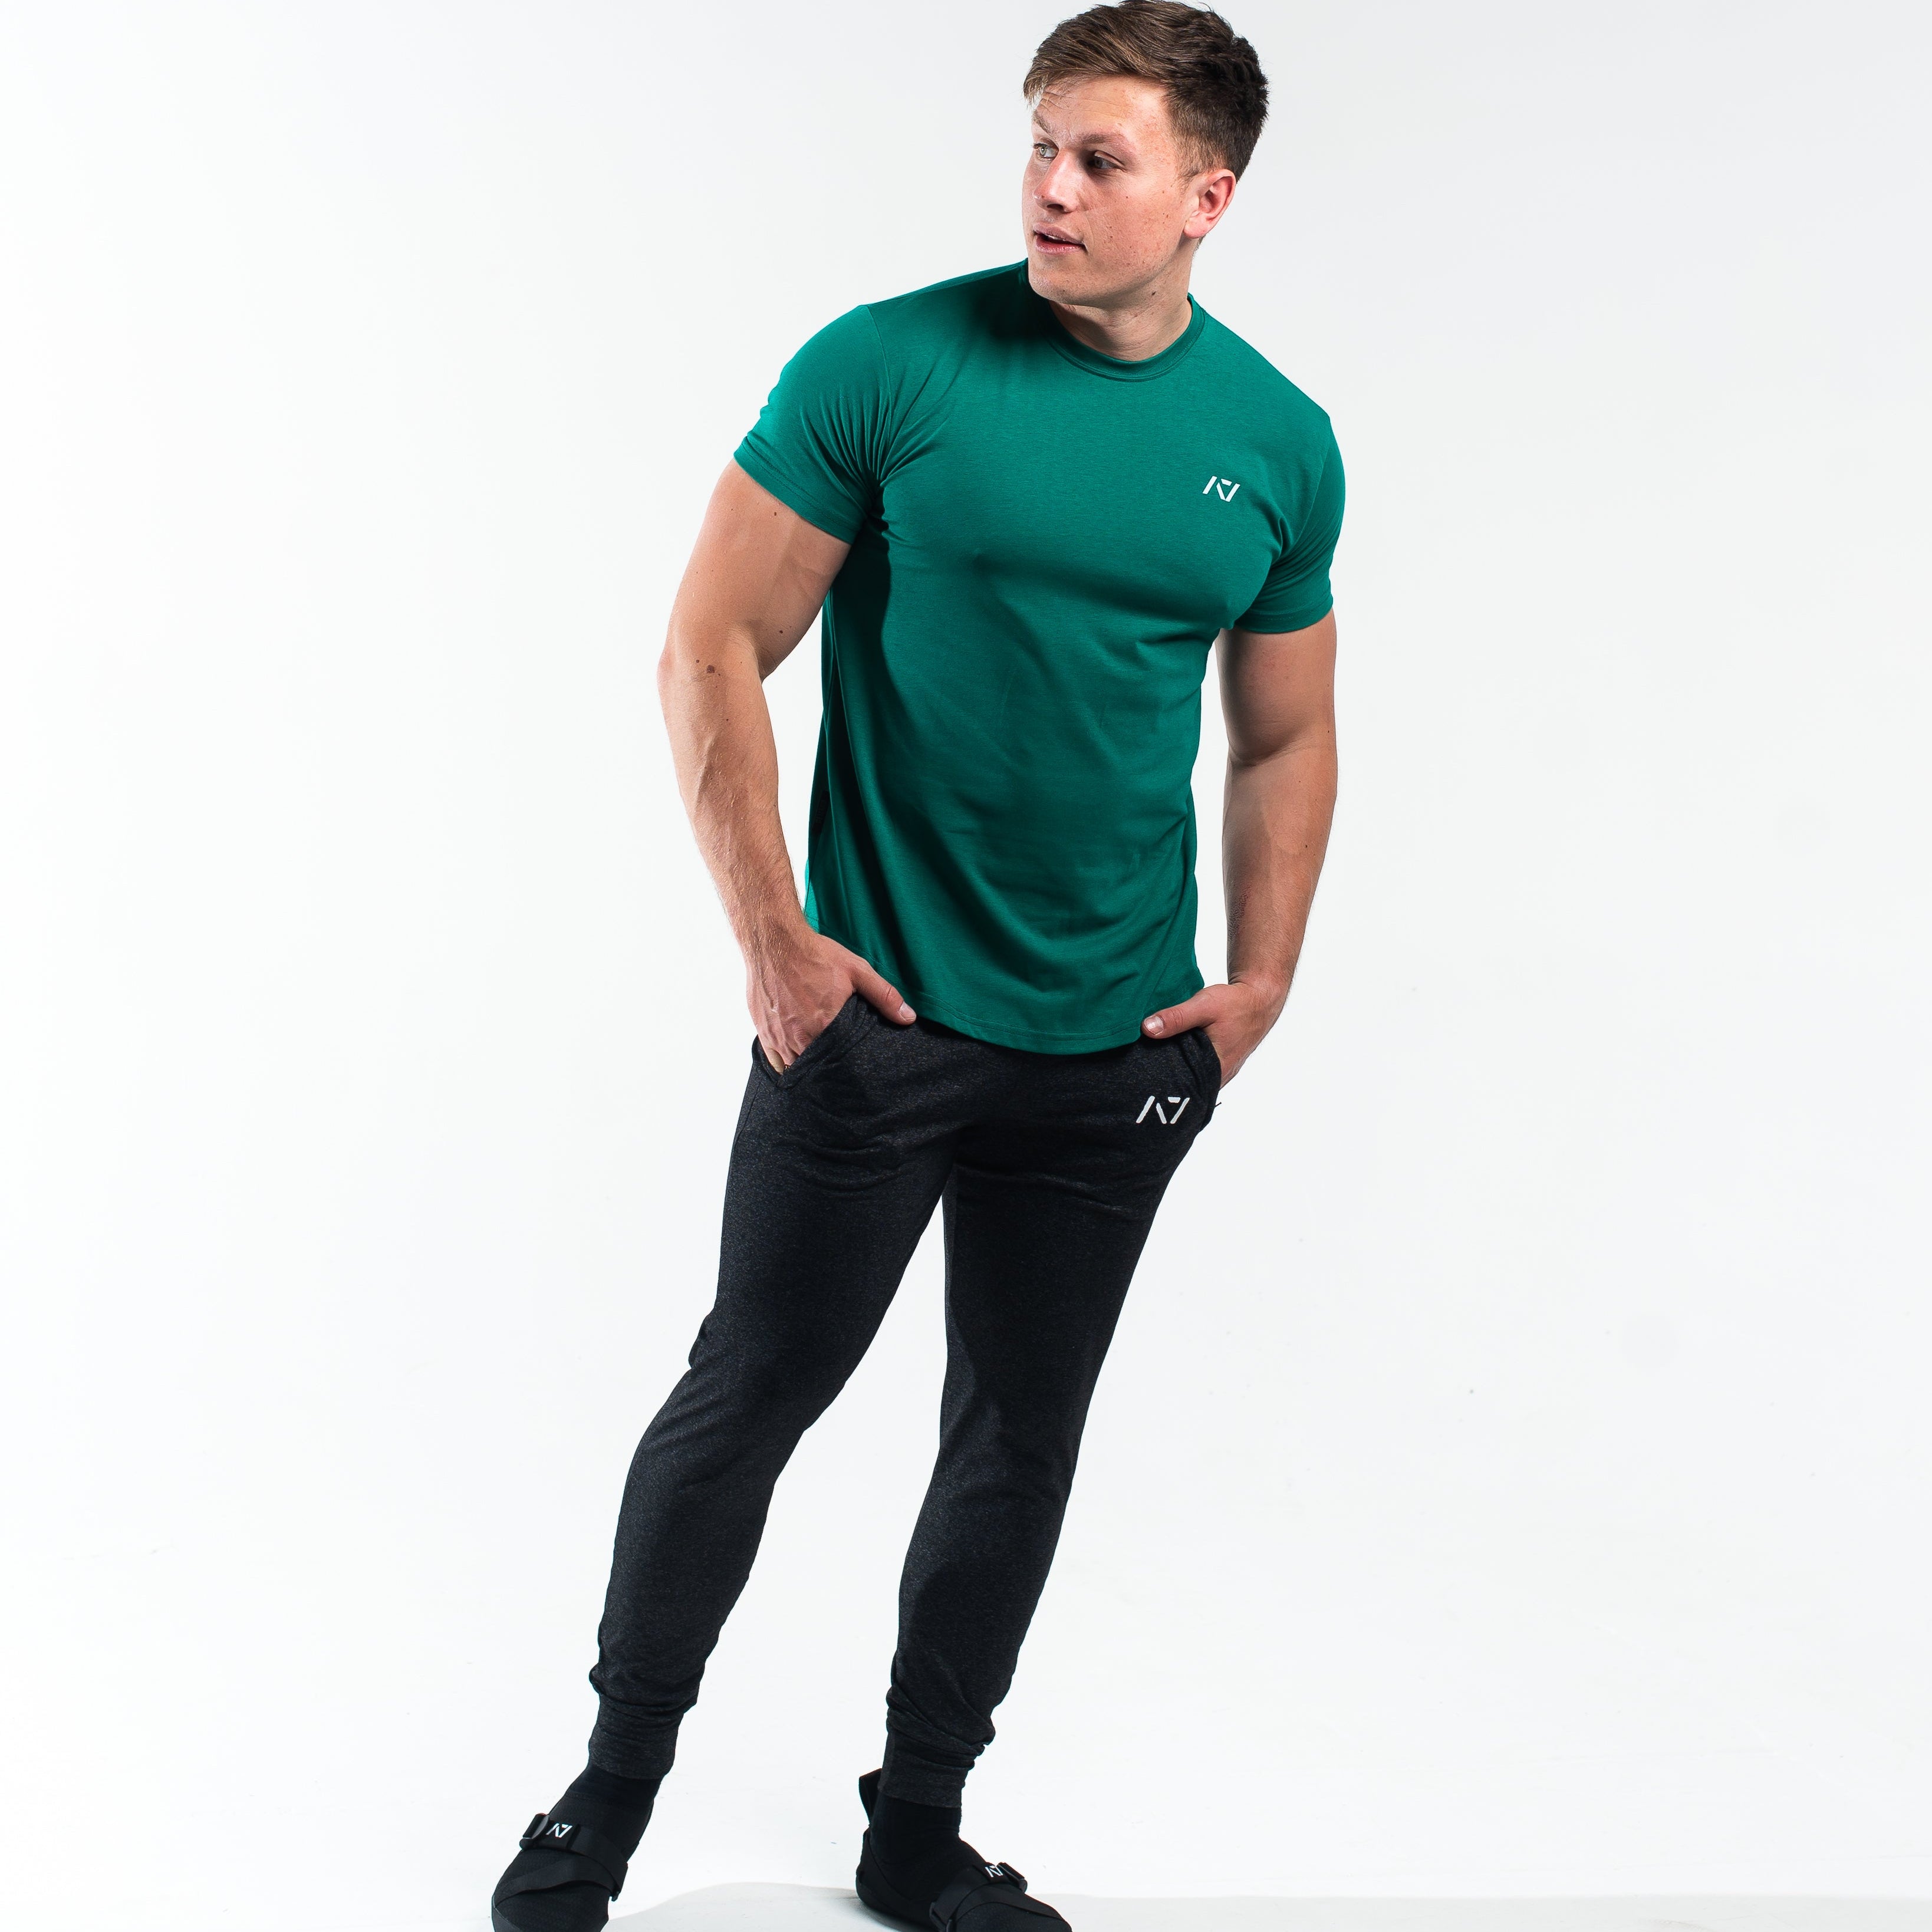 The Balance Collection combines comfort and aesthetics. The pieces in this collection are made with comfortable fabrics and minimal logos to create a simple, yet impactful look. All A7 Powerlifting Equipment shipping to UK, Norway, Switzerland and Iceland.